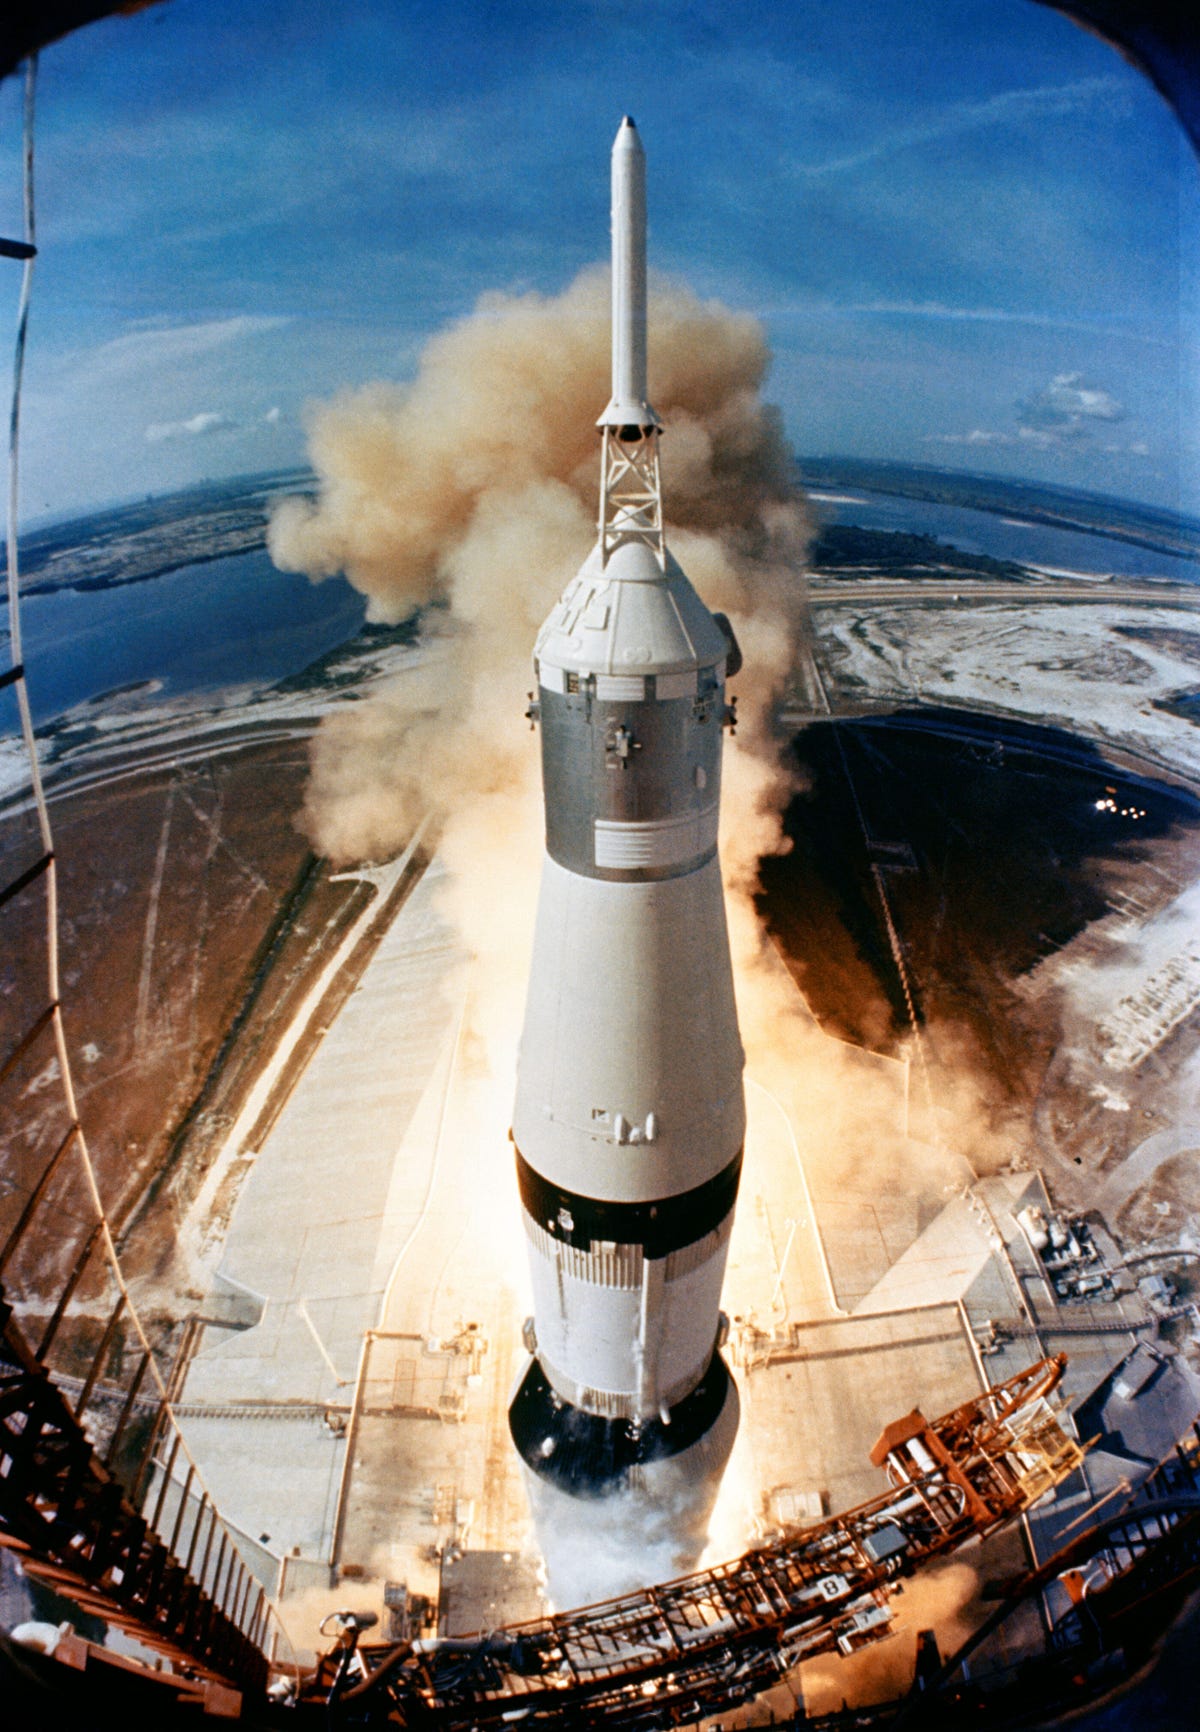 Massive Saturn V rocket takes off in a blaze of glory from Florida for the Apollo 11 mission.